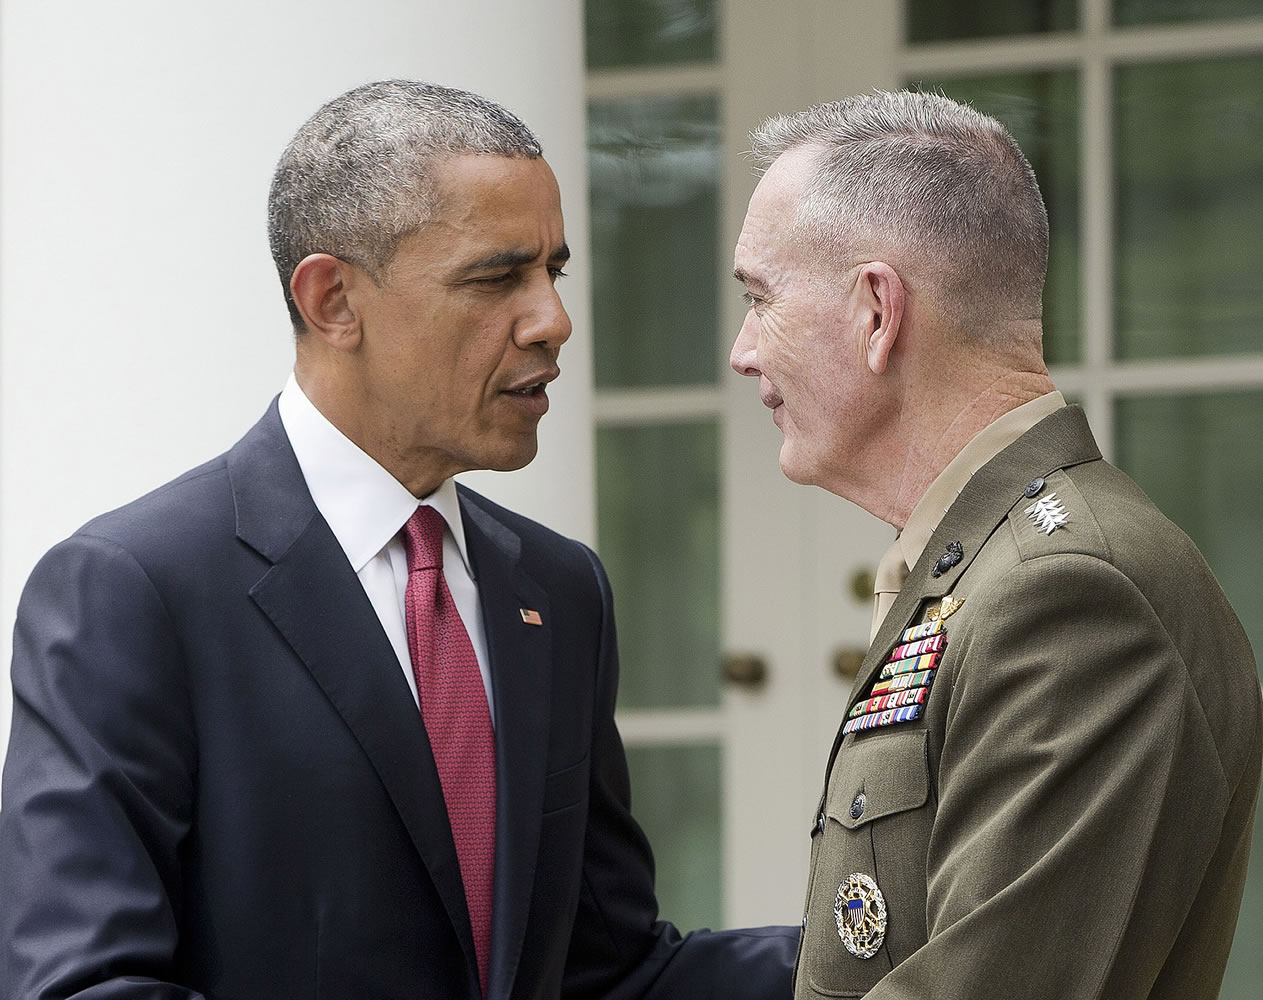 President Barack Obama shakes hands Tuesday with Marine Gen. Joseph Dunford after announcing in the Rose Garden of the White House in Washington, he will nominate Dunford as the next chairman of the Joint Chiefs of Staff. Obama chose the widely respected, combat-hardened commander who led the Afghanistan war coalition during a key transitional period during 2013-2014 to succeed Army Gen.